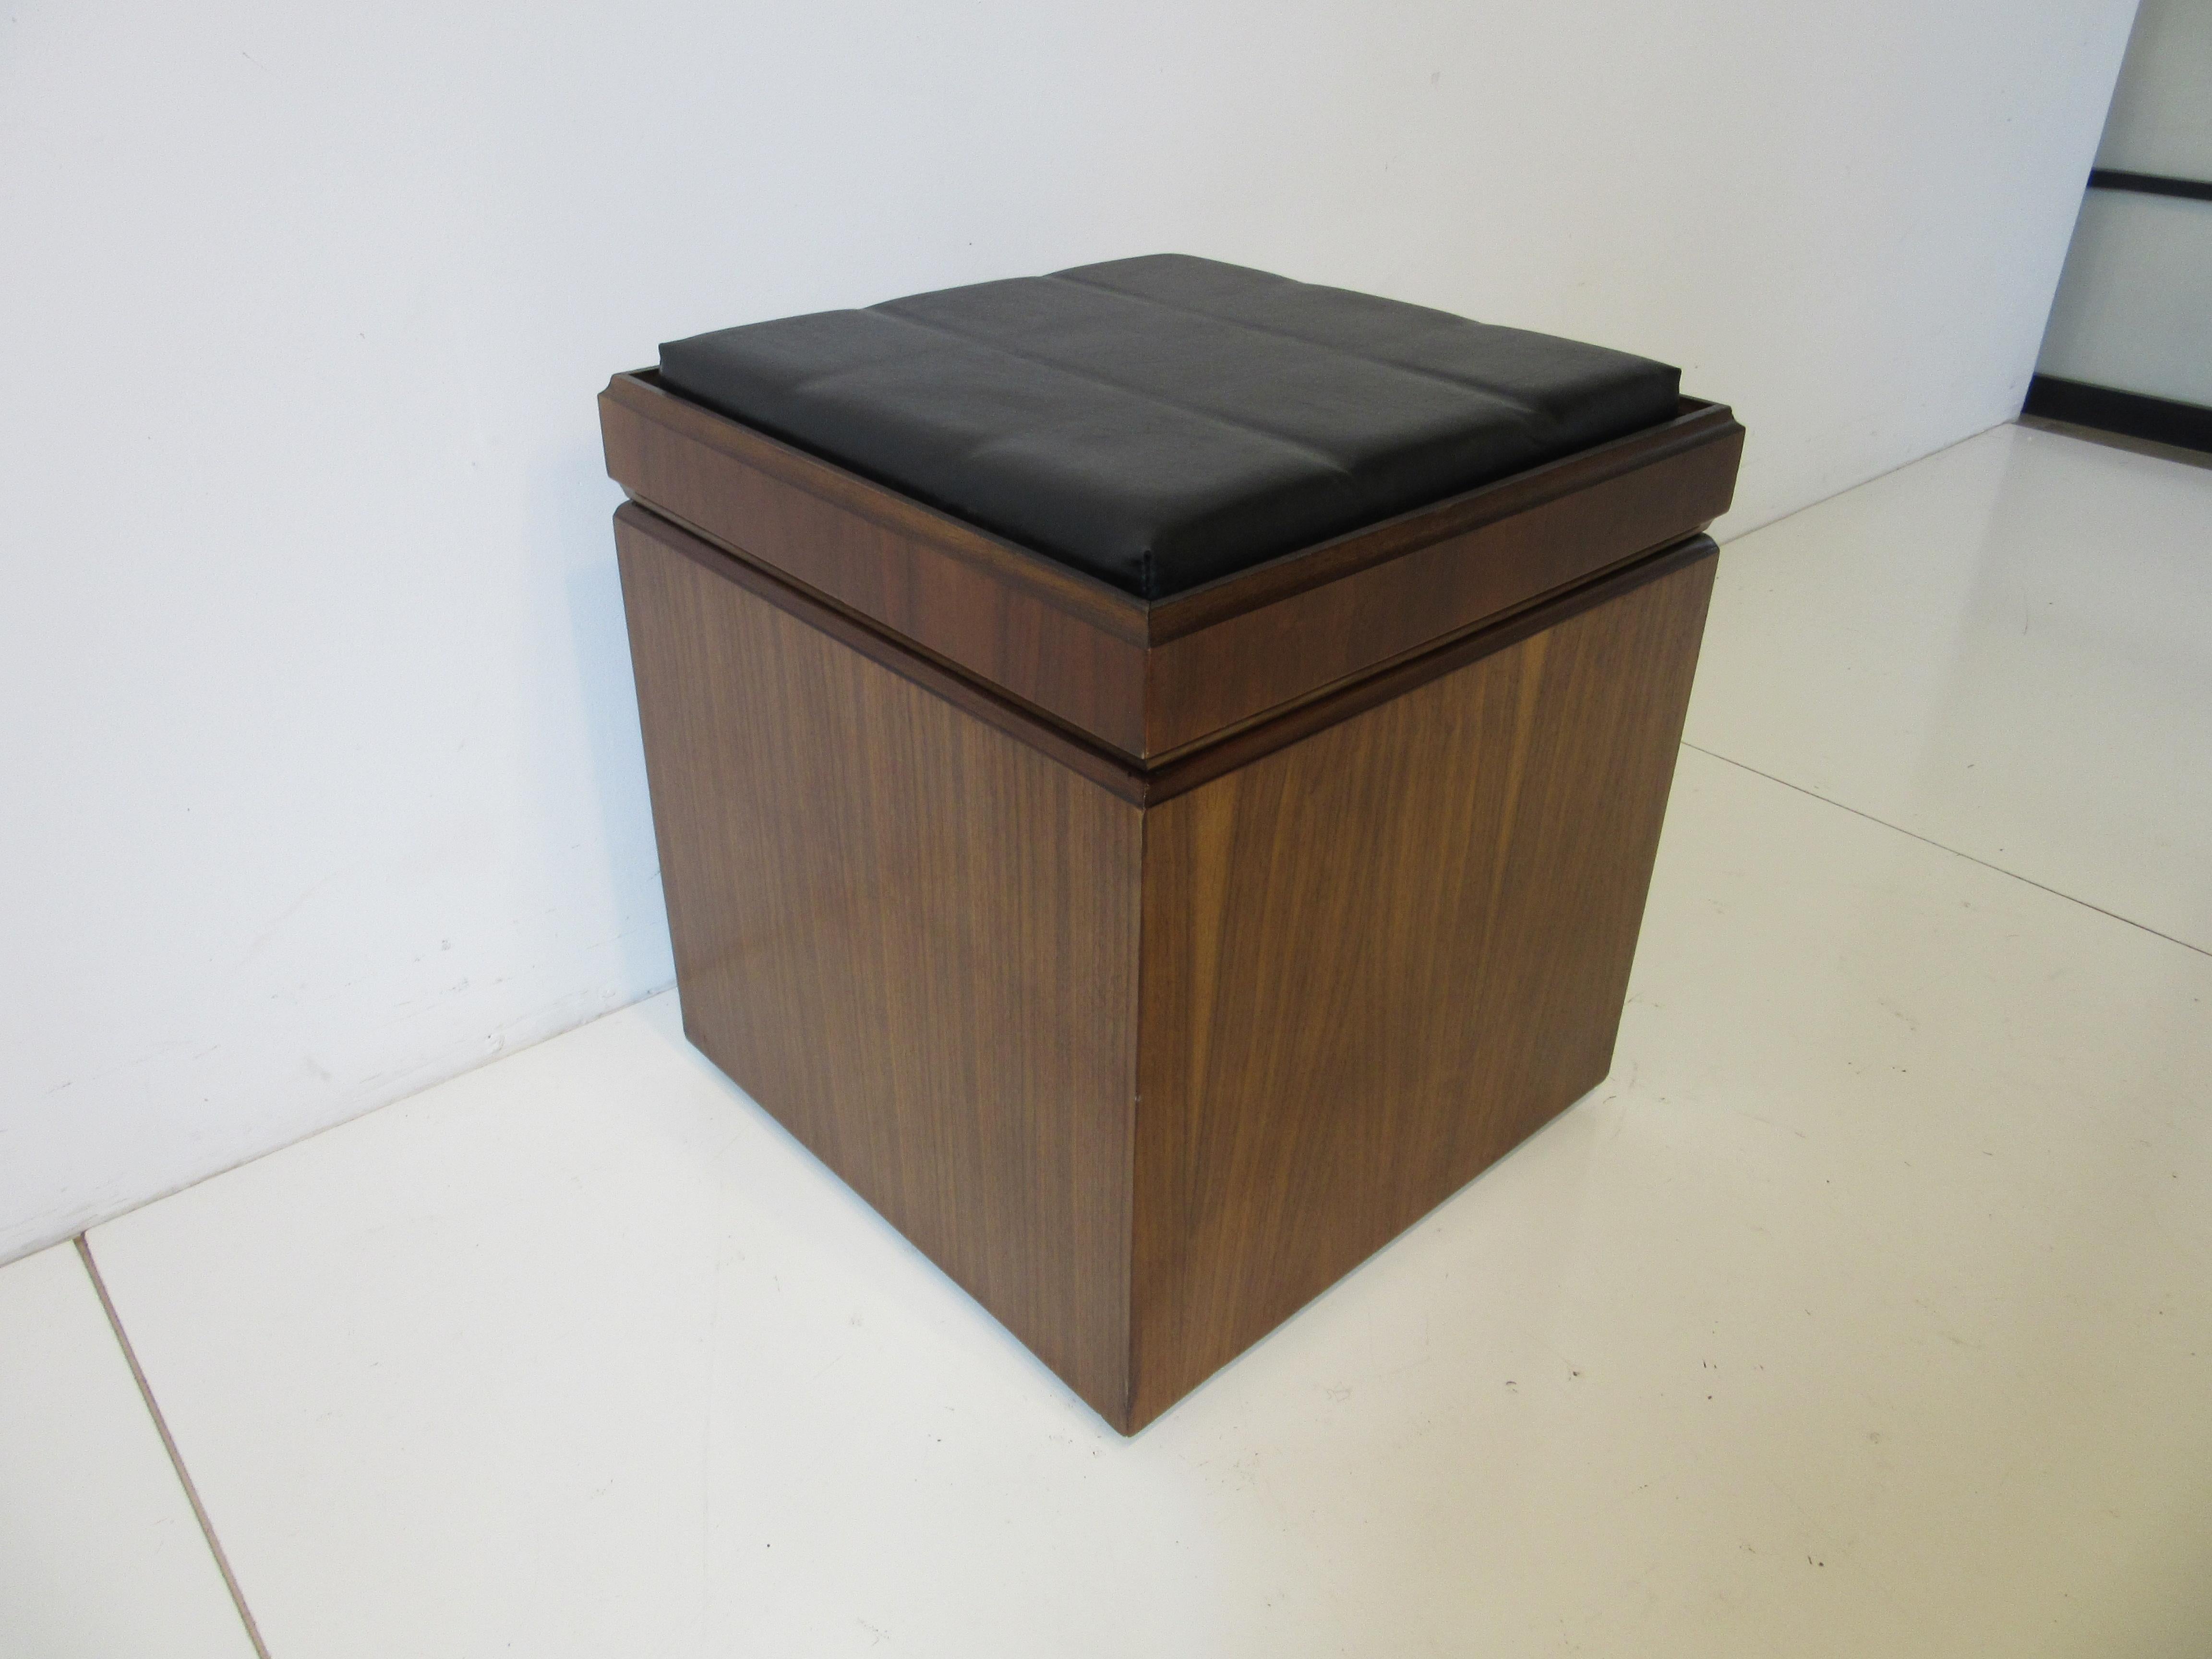 A square dark walnut stool with black leatherette top which can be turned over to expose a walnut chess board . Additionally the inside box has three slots for vinyl record storage which can hold a few dozen or more of your favorite albums . This is